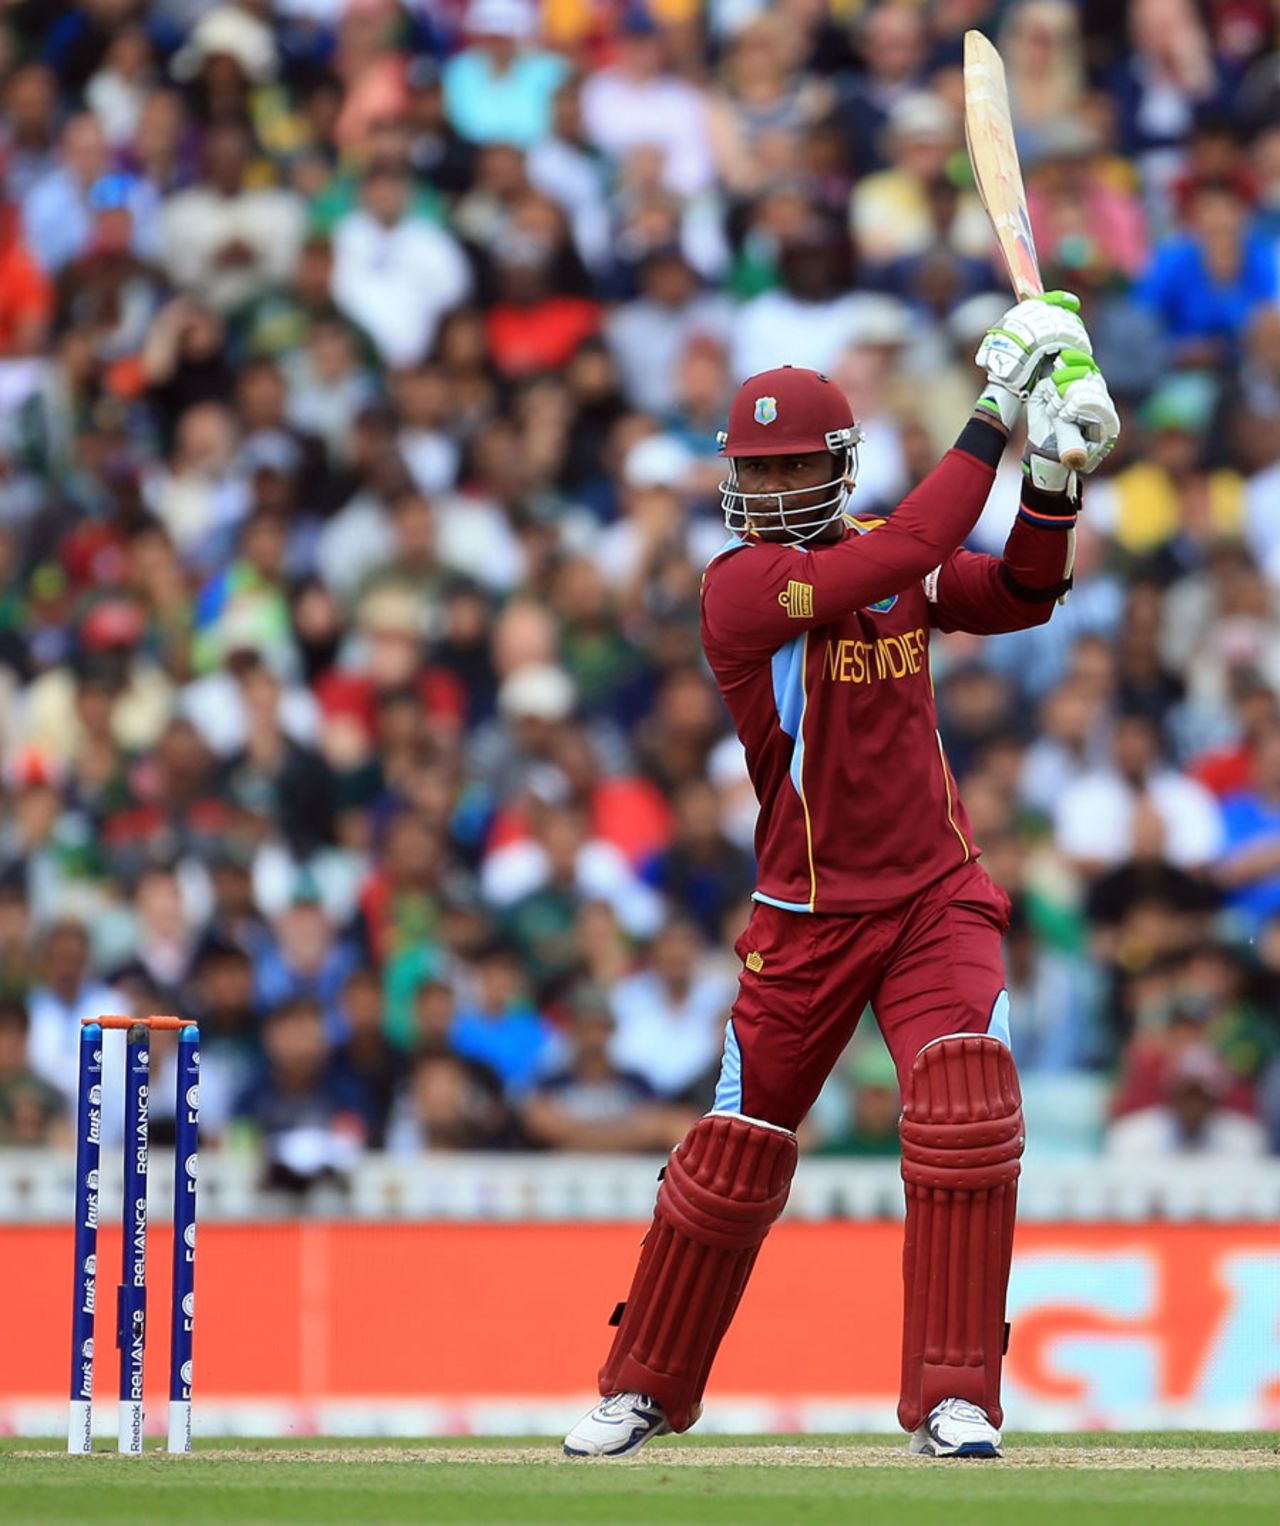 Marlon Samuels flays to the off side, West Indies v Pakistan, Champions Trophy, Group B, The Oval, June 7, 2013